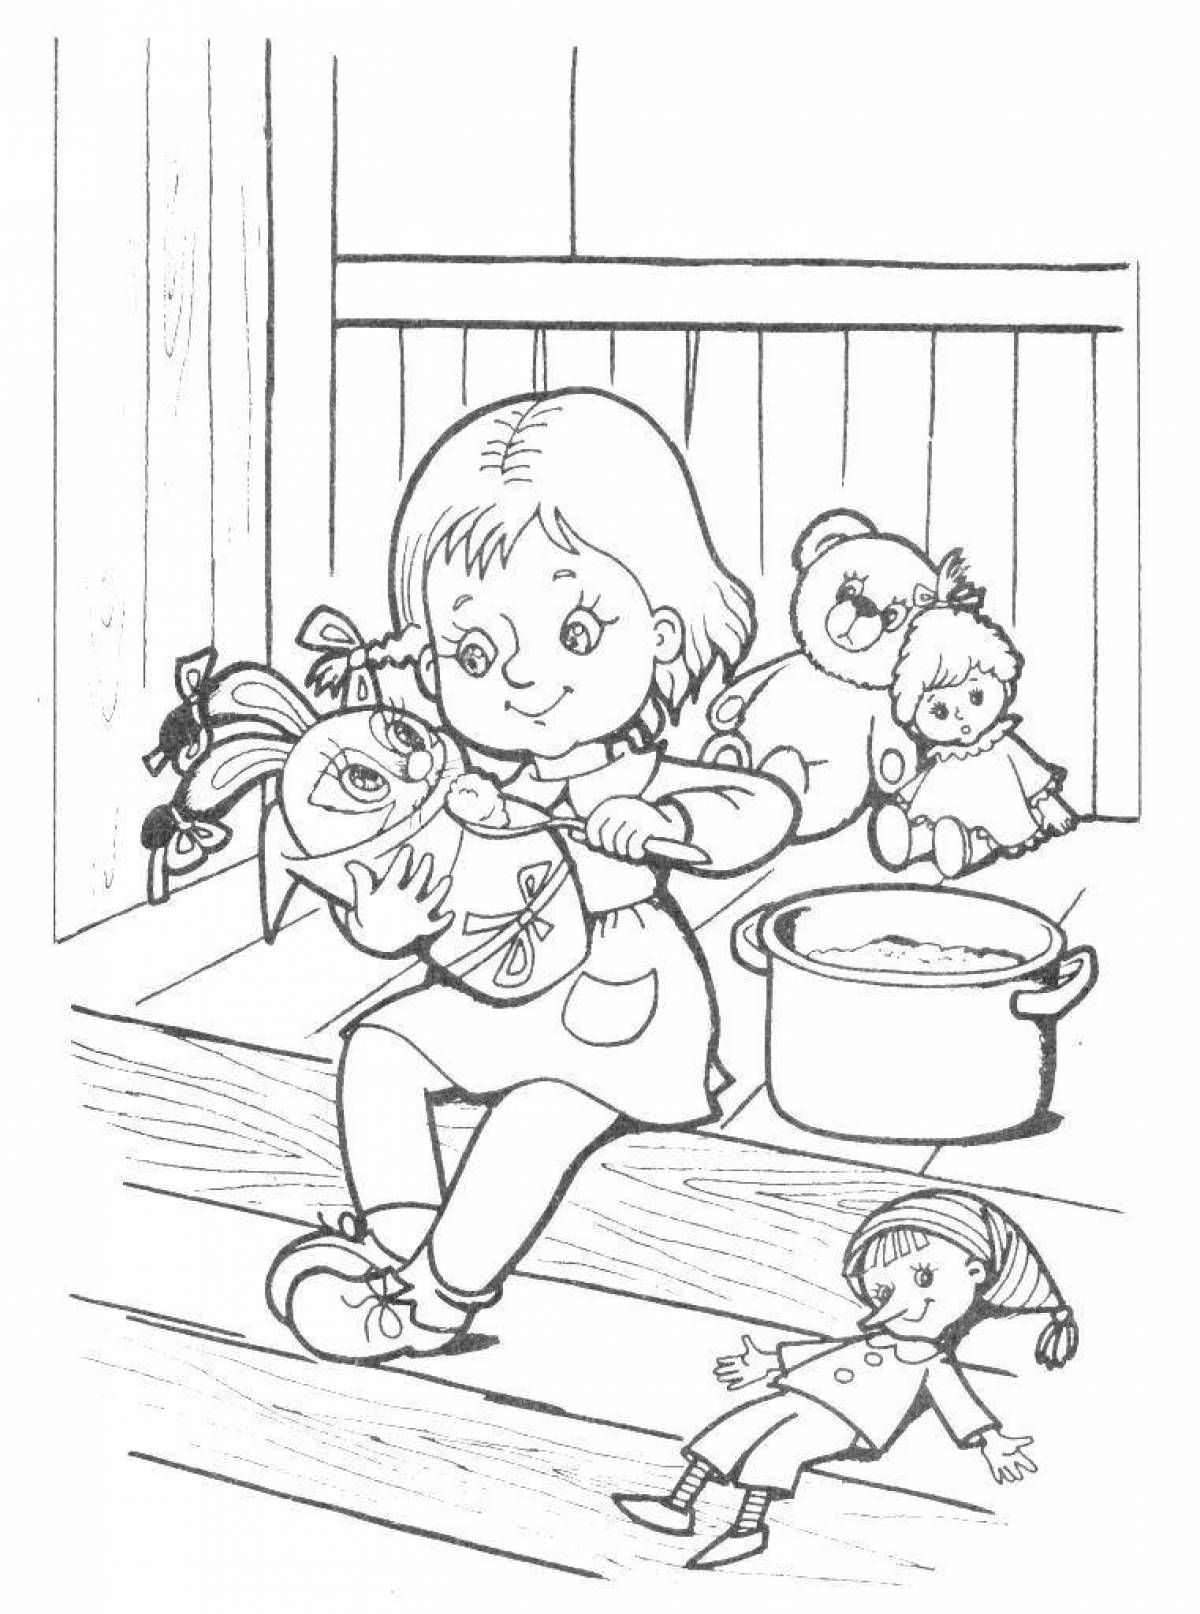 Coloring page inviting ussr